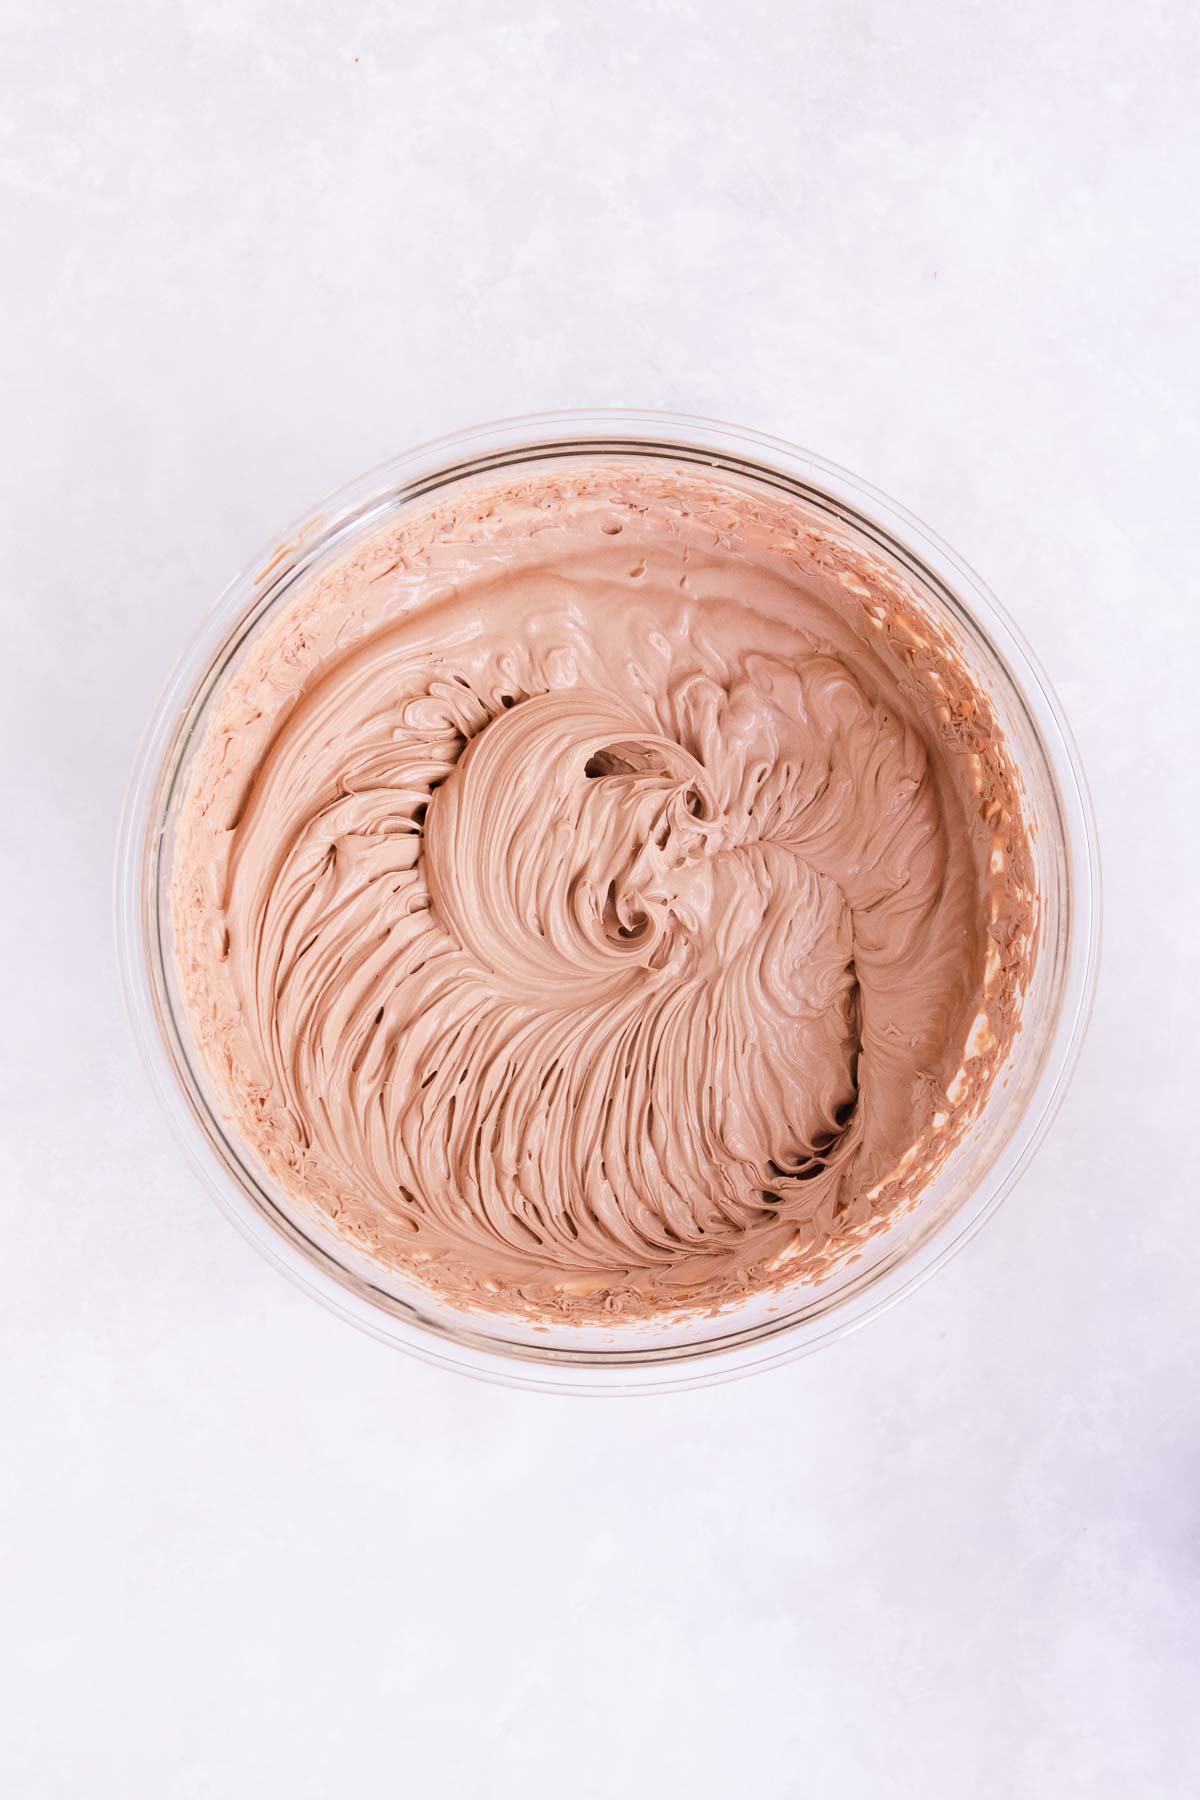 The whipped mousse mixture.